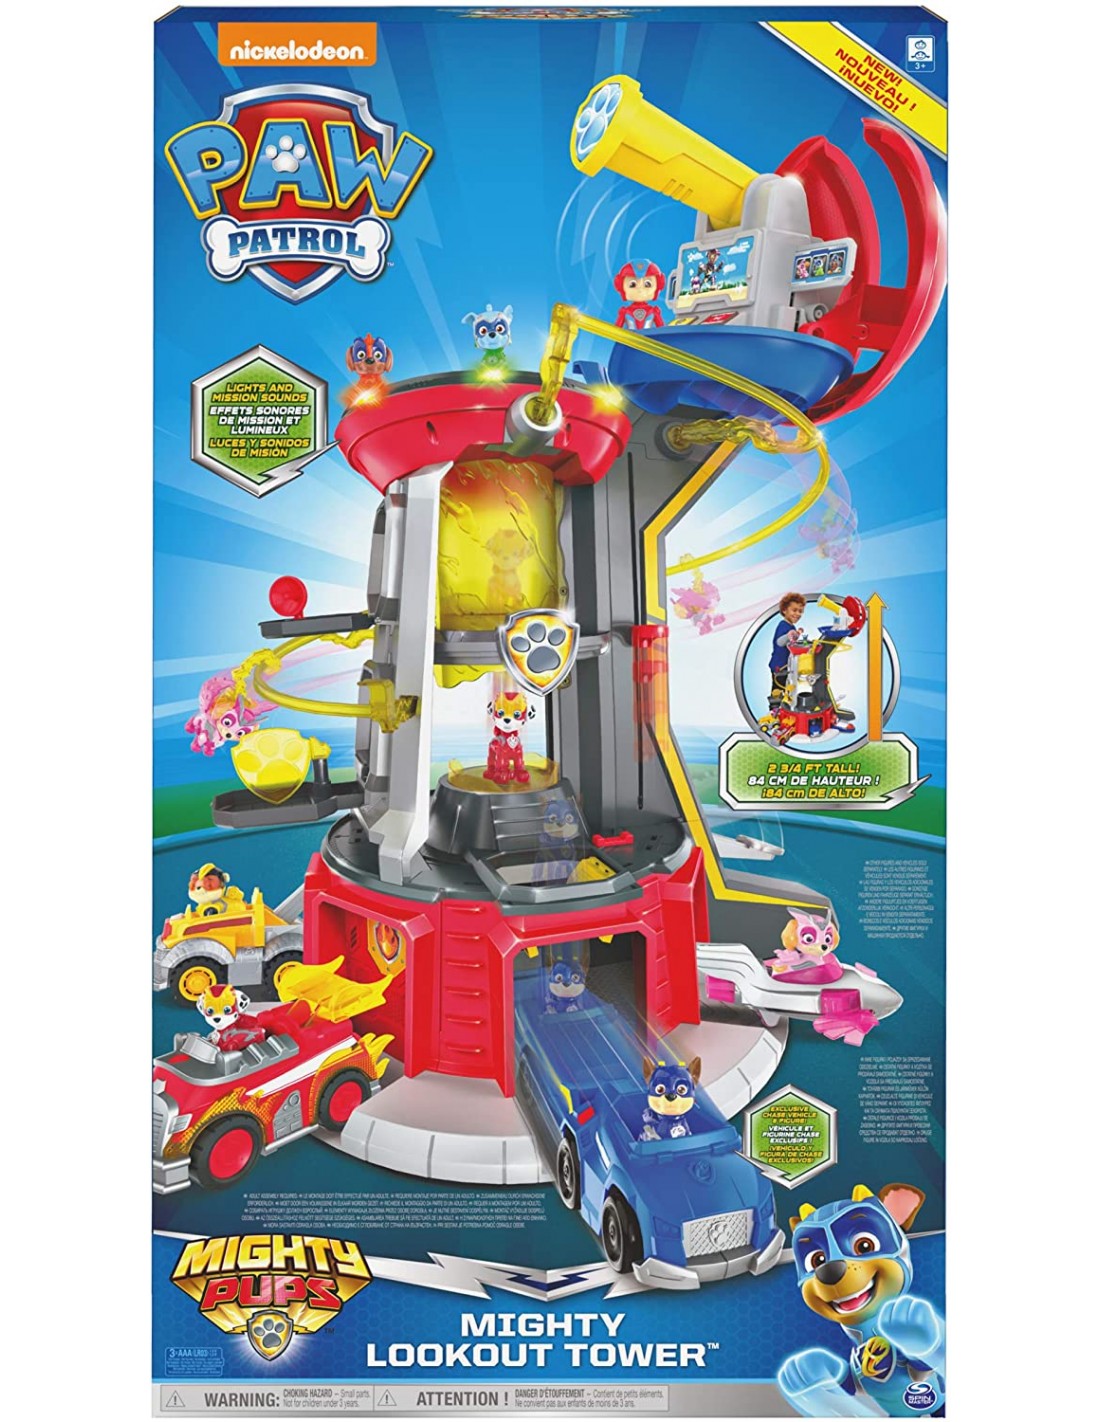 Paw Patrol Mega-headquarters, the Mighty Pups Spin master